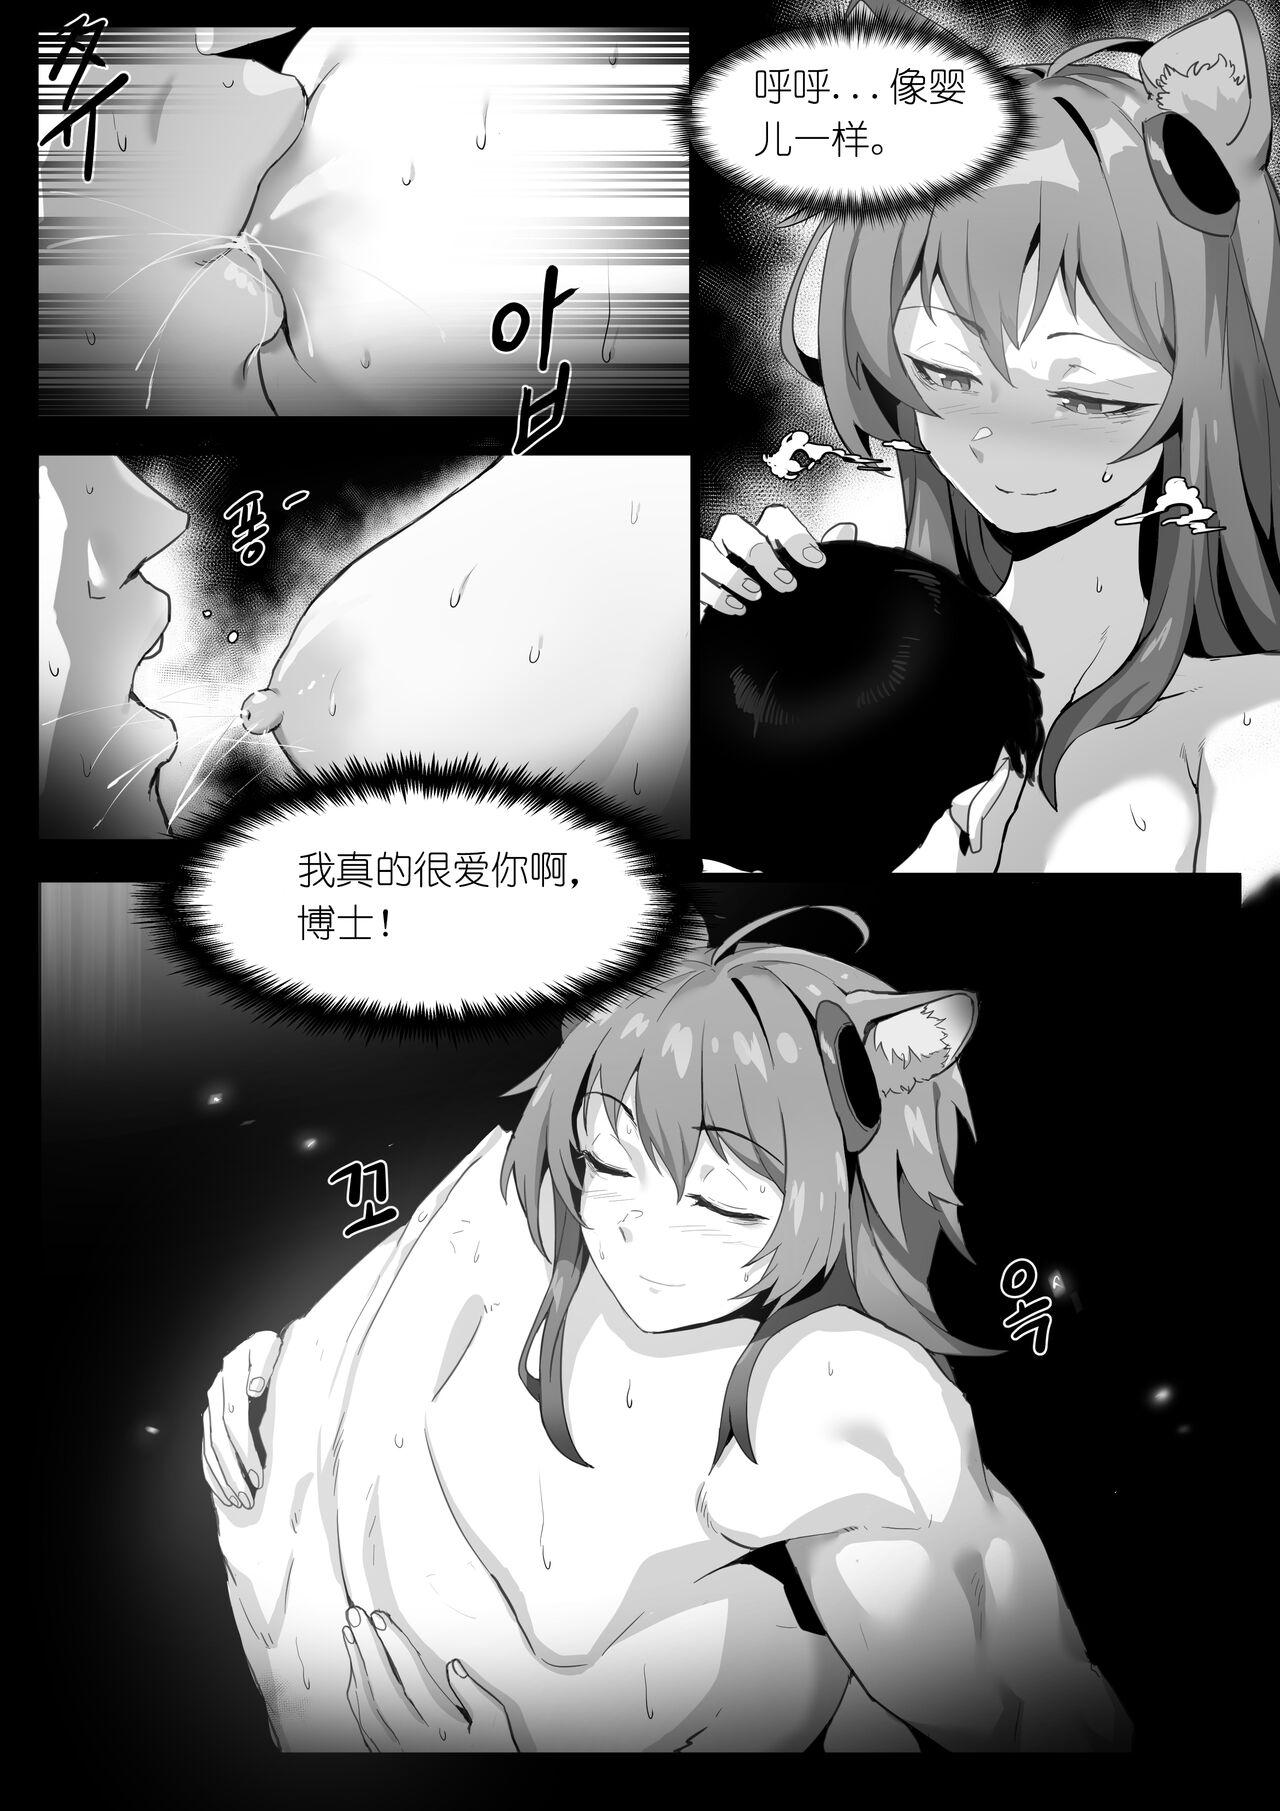 Blowing 欲望方舟记录3 - Arknights Blows - Page 3